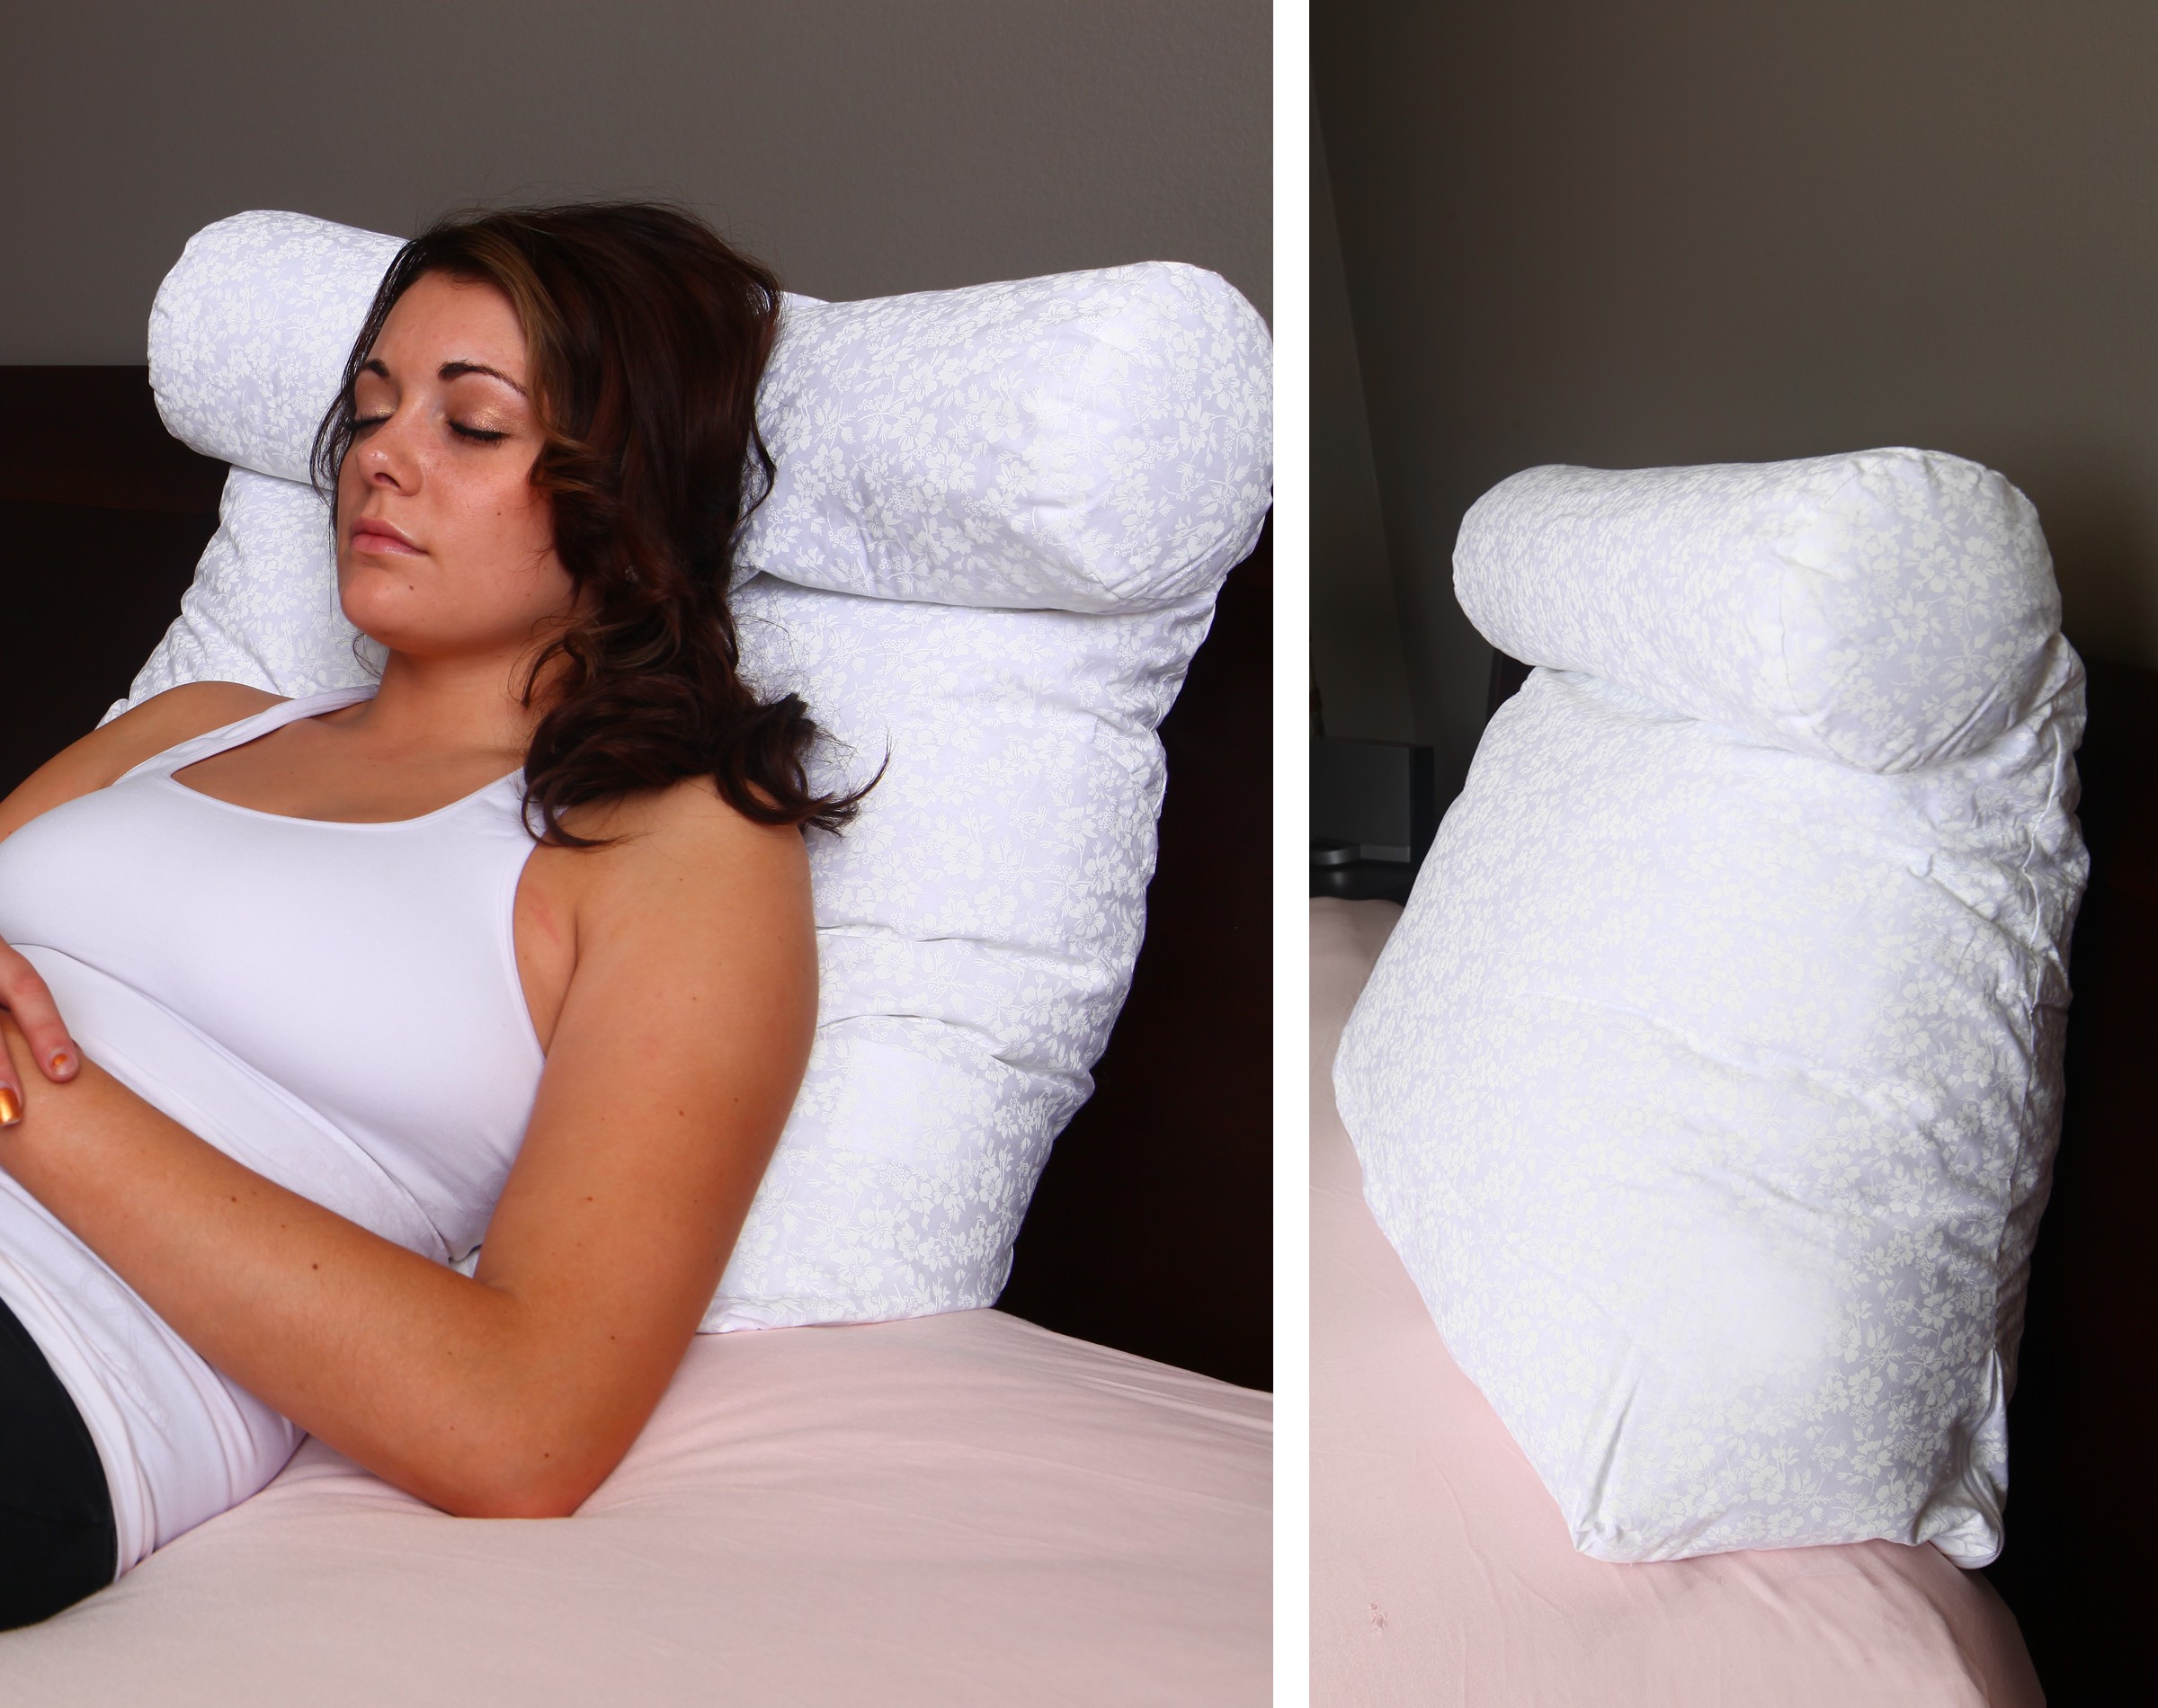 support pillow for bed